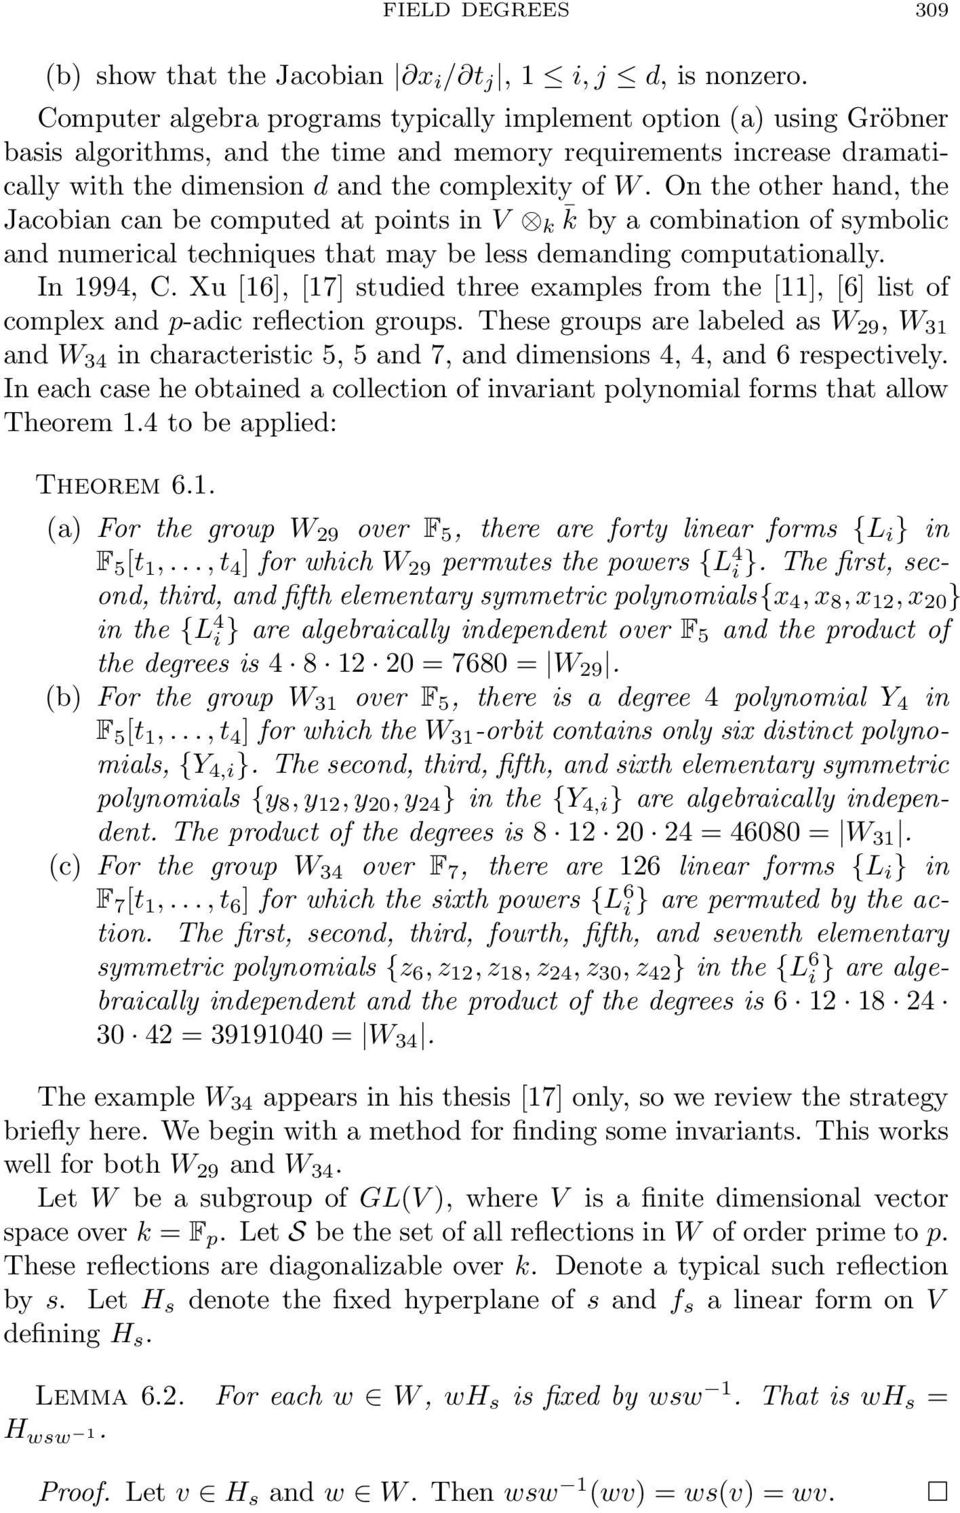 On the other hand, the Jacobian can be computed at points in V k k by a combination of symbolic and numerical techniques that may be less demanding computationally. In 1994, C.